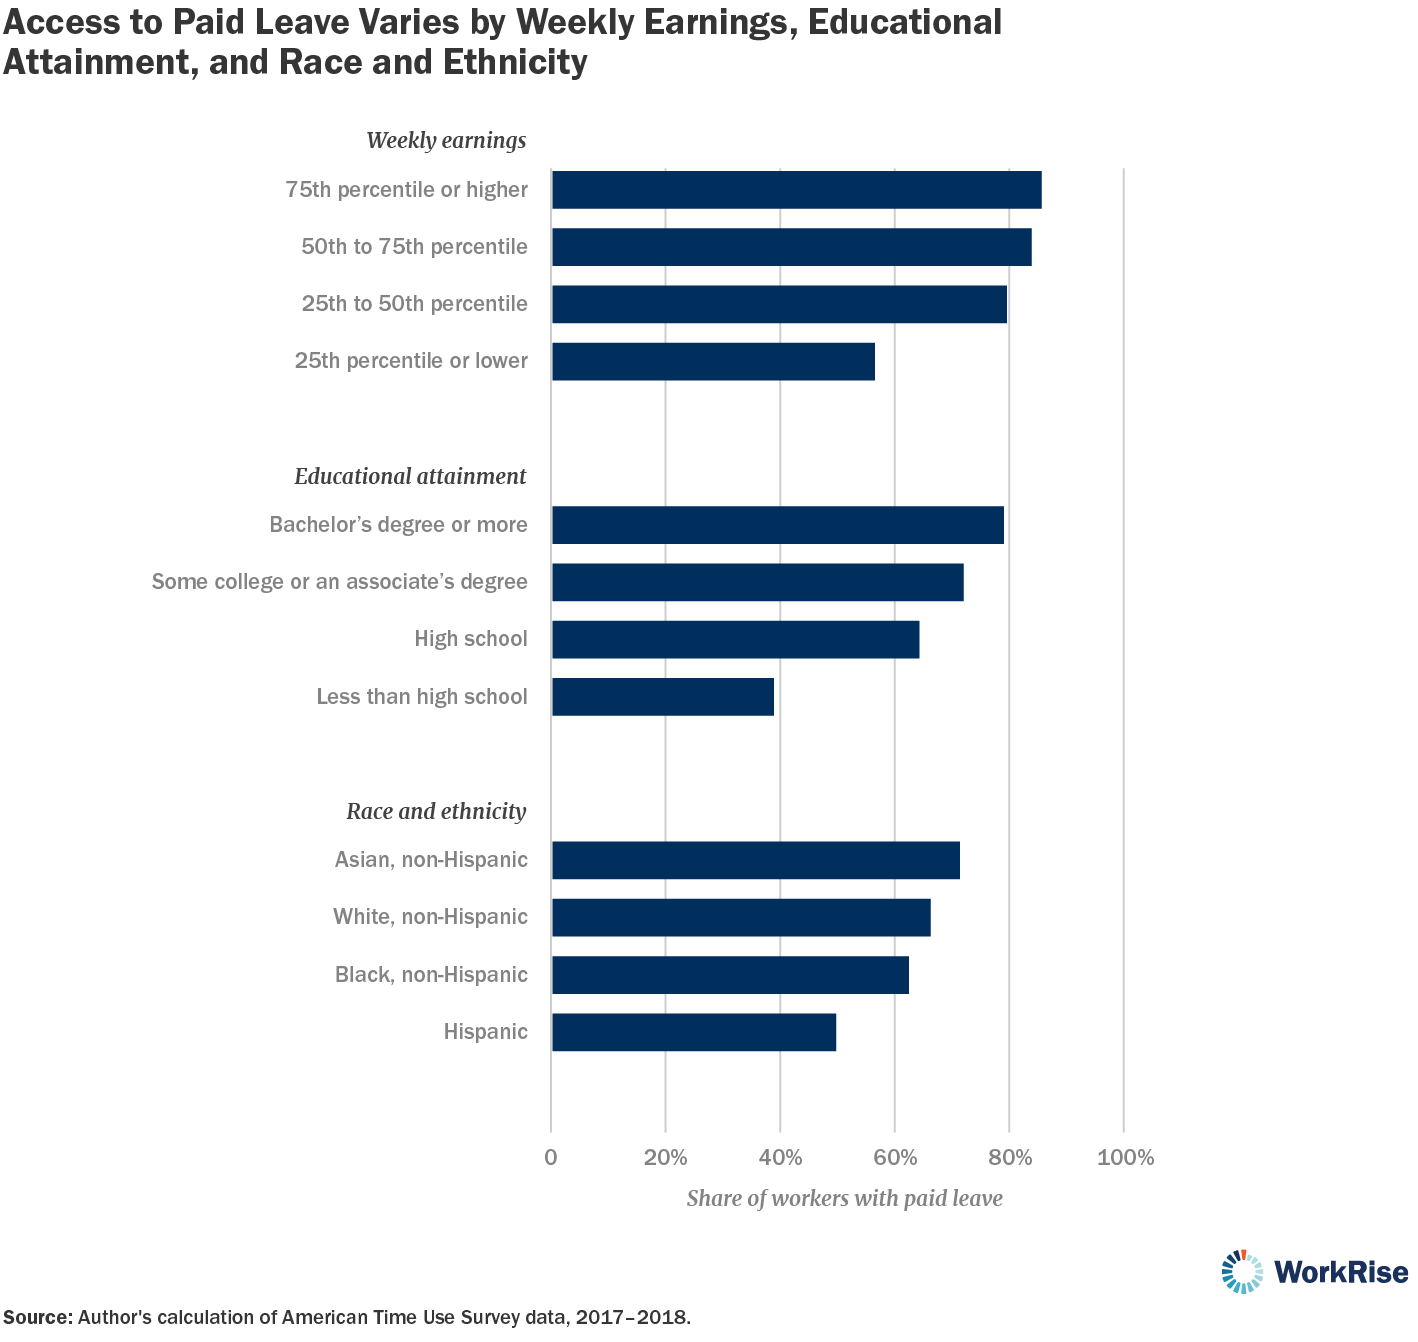 Access to Paid Leave Varies by Weekly Earnings, Educational Attainment, and Race and Ethnicity